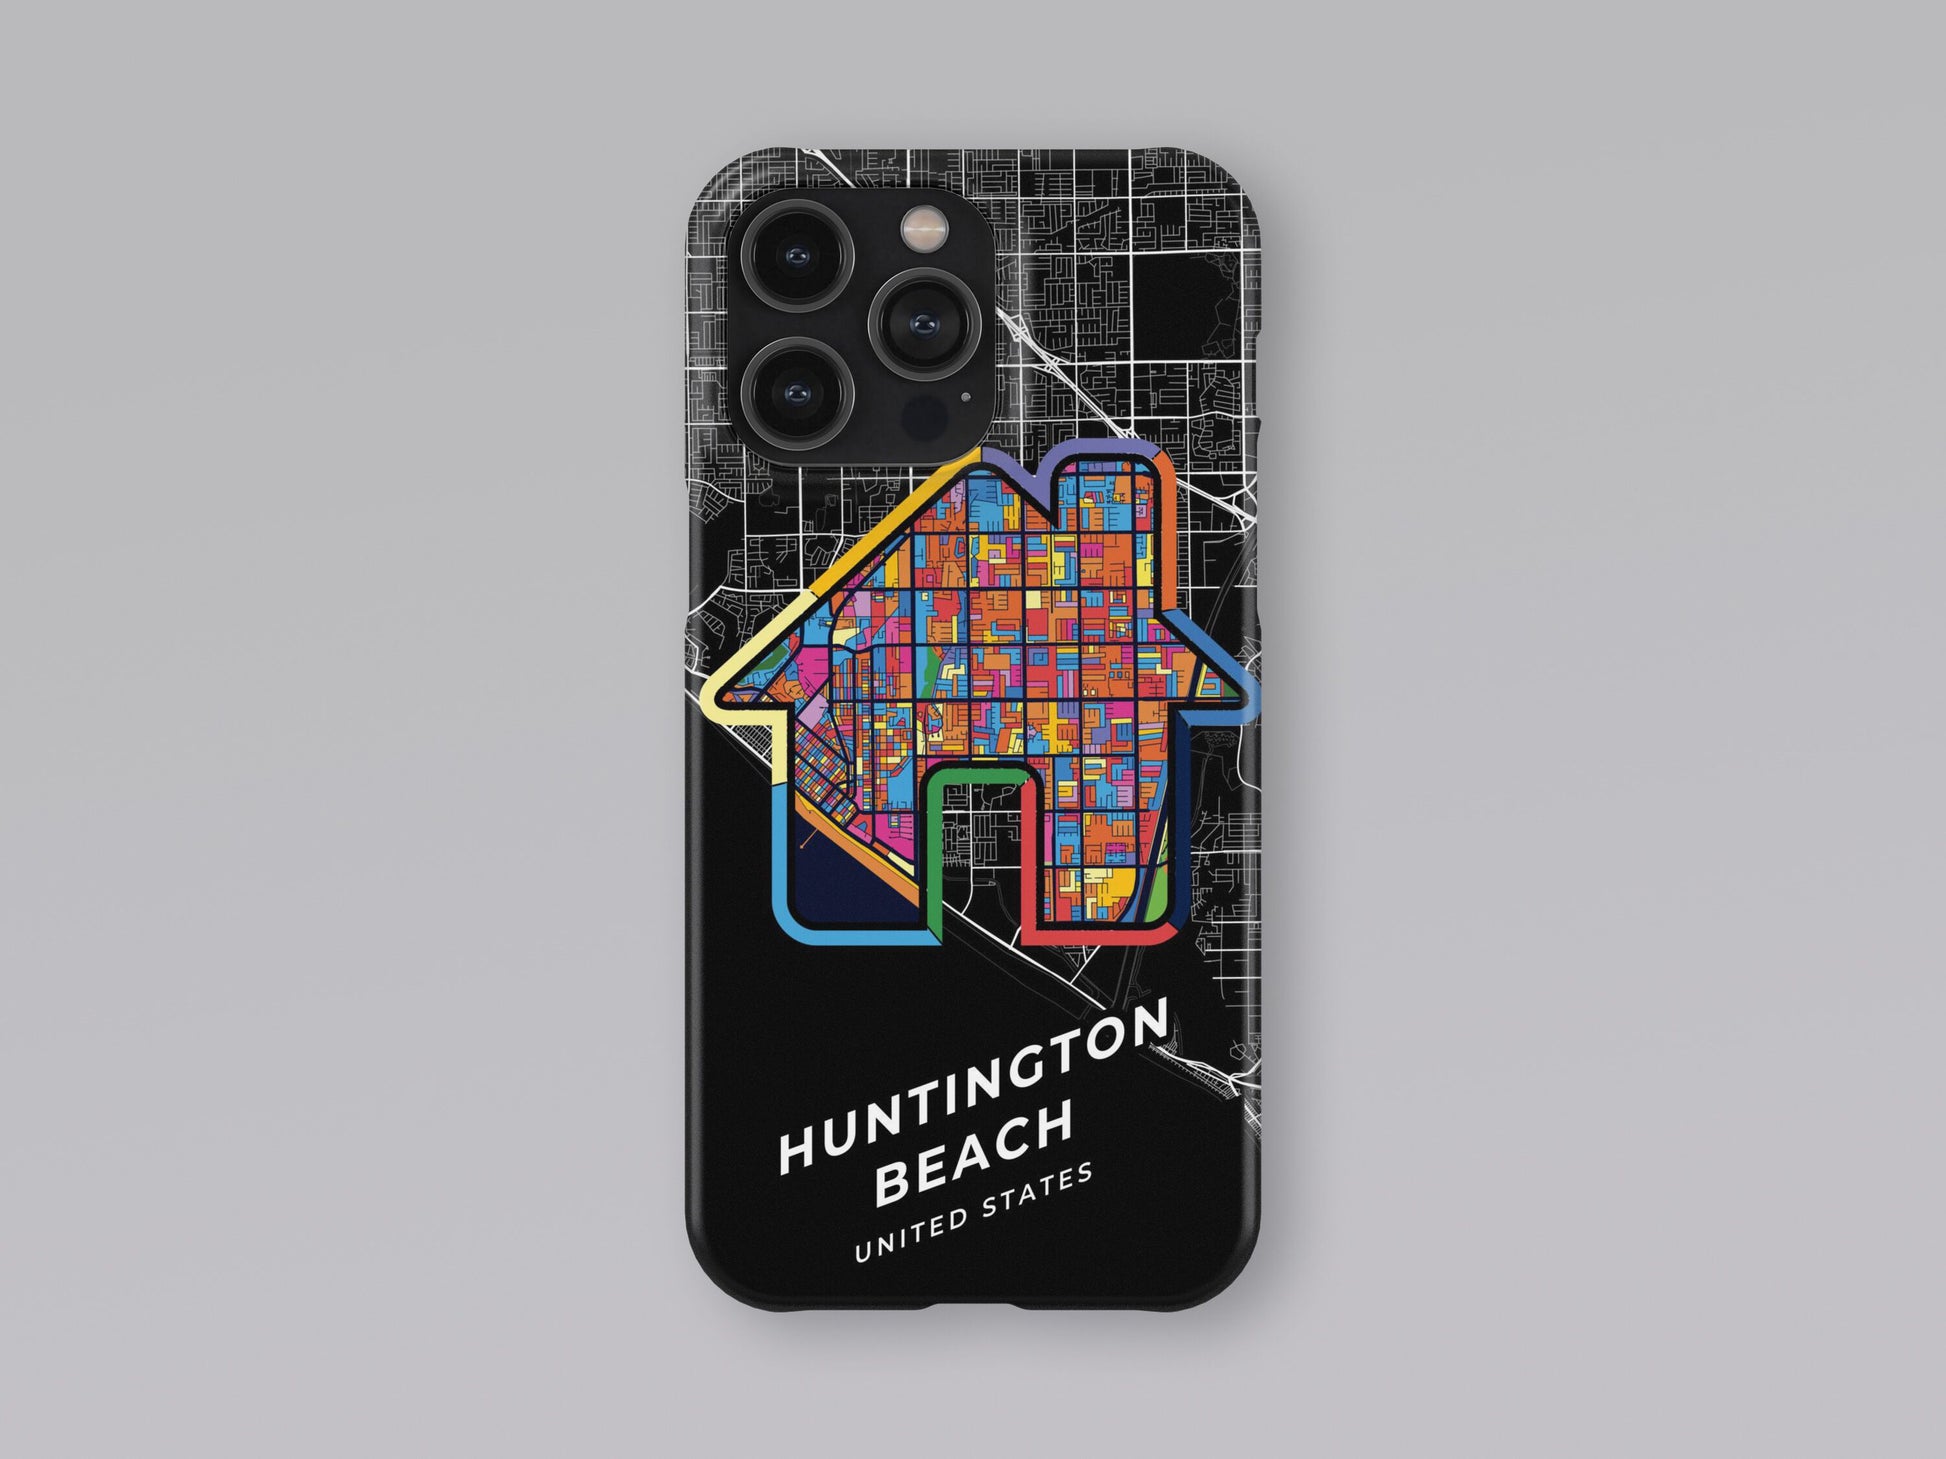 Huntington Beach California slim phone case with colorful icon. Birthday, wedding or housewarming gift. Couple match cases. 3